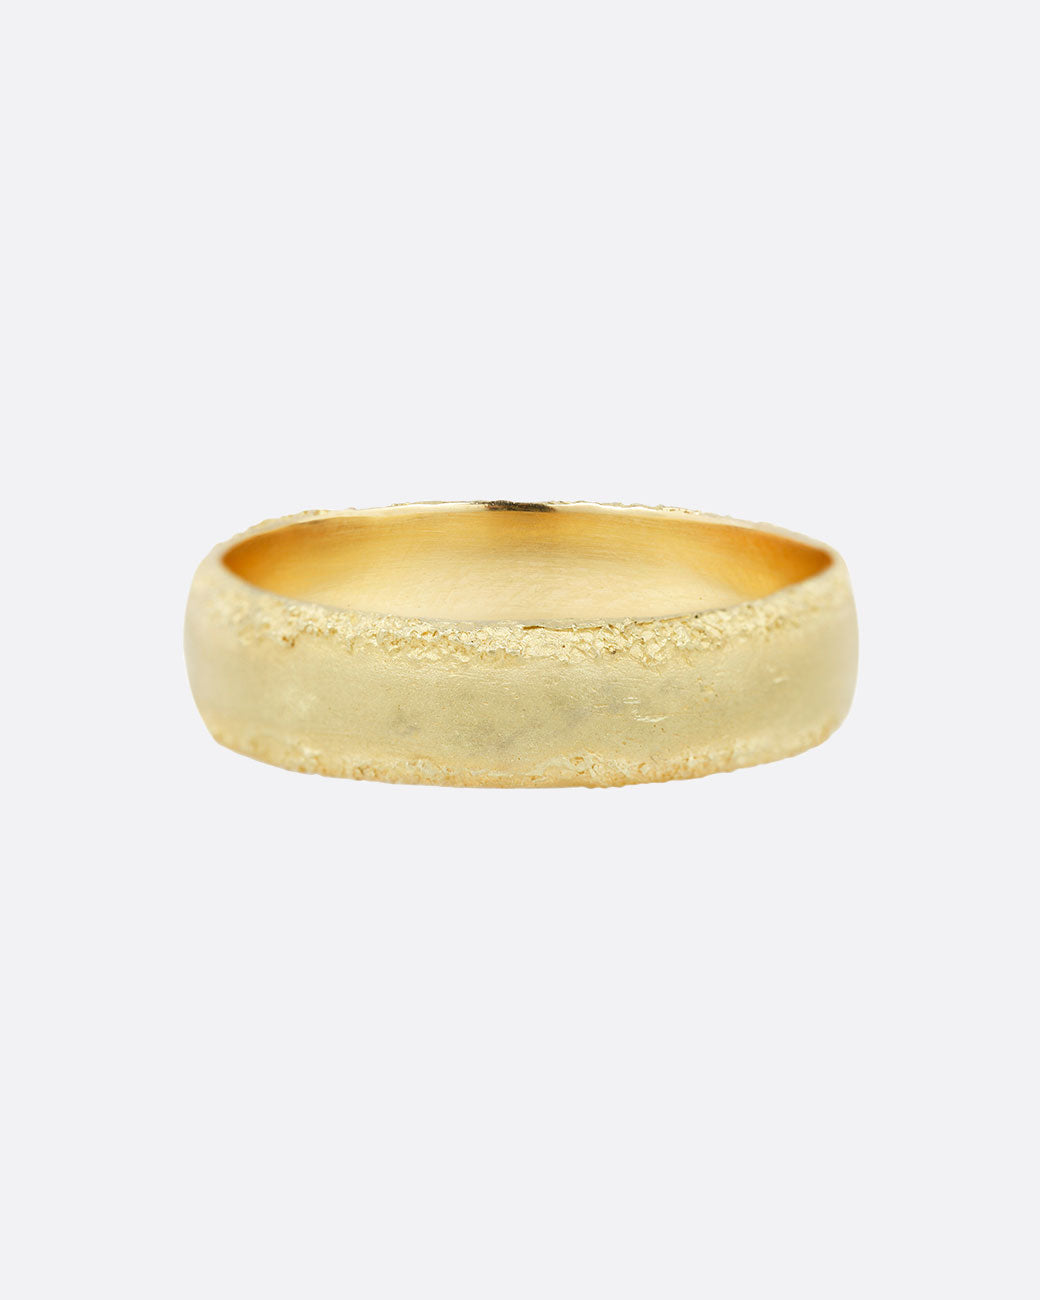 18k yellow gold Urion band ring by Aili